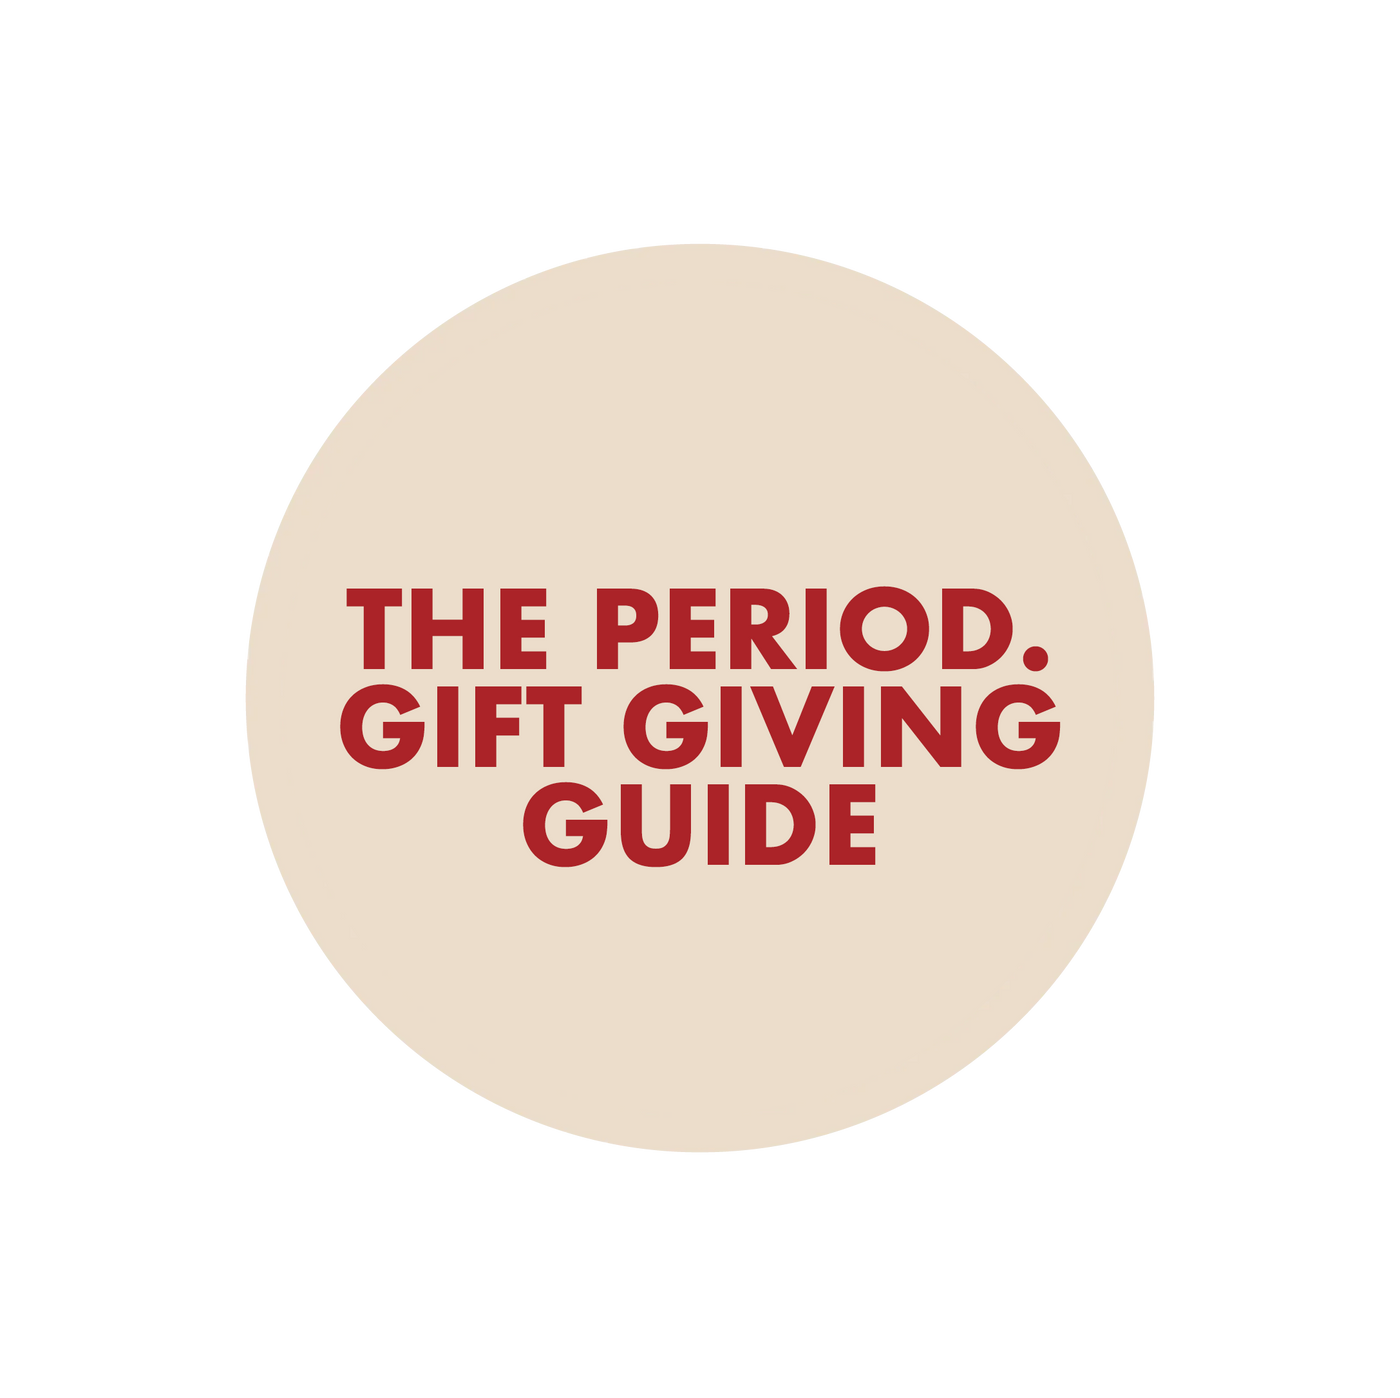 The Period Gift Giving Guide